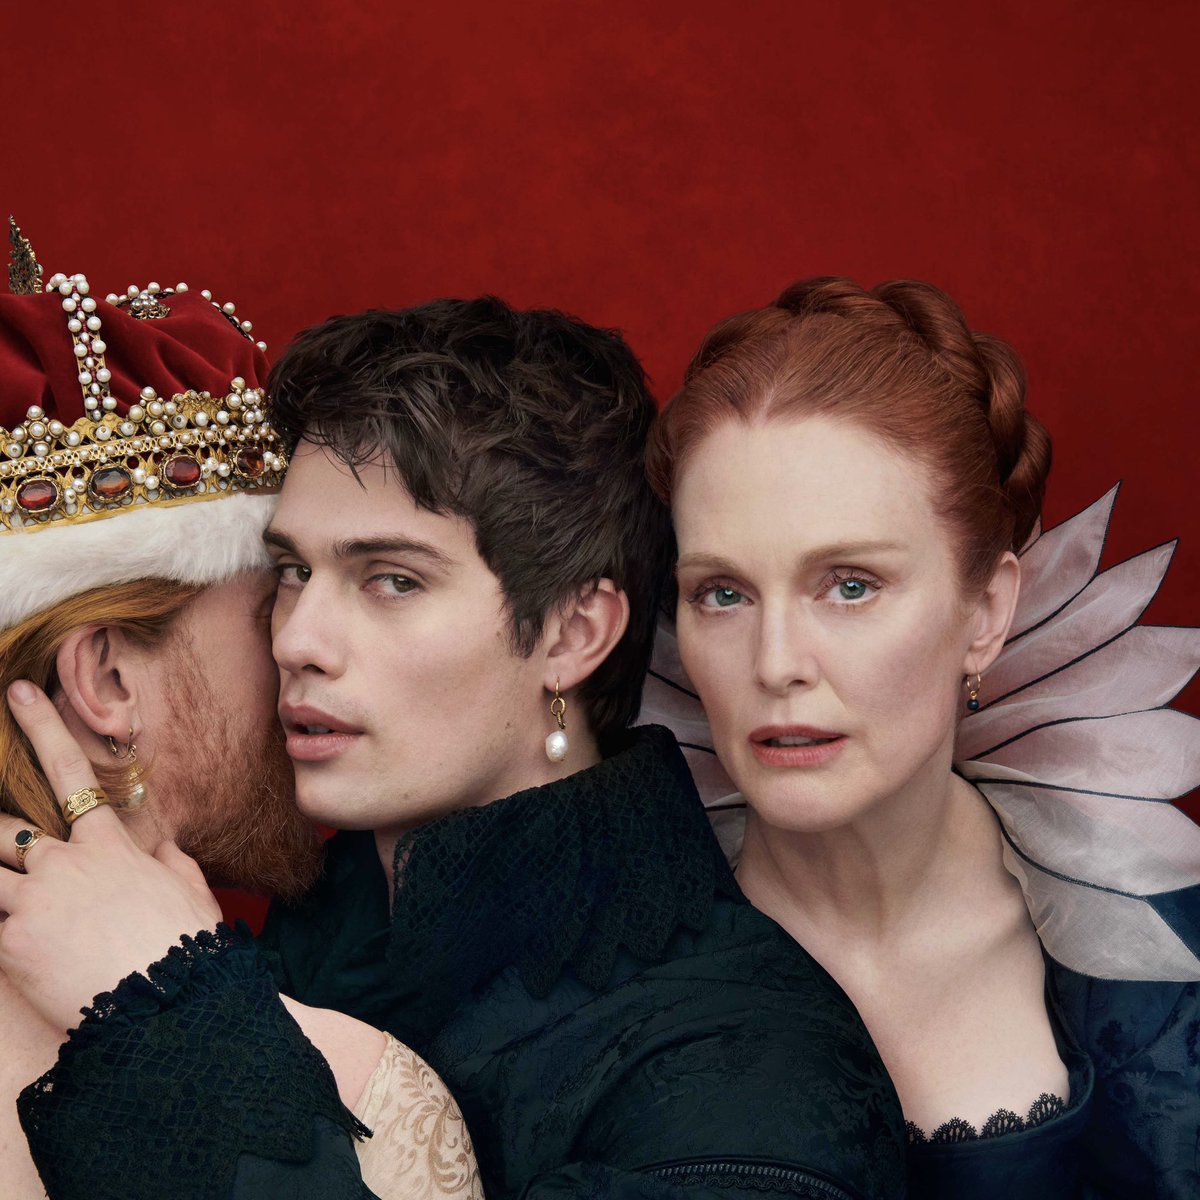 ‘MARY & GEORGE’ premieres April 5 on STARZ.

It follows Mary Villiers (Julianne Moore), who moulded her beautiful and charismatic son, George (Nicholas Galitzine), to seduce King James VI of Scotland and I of England and become his all-powerful lover.